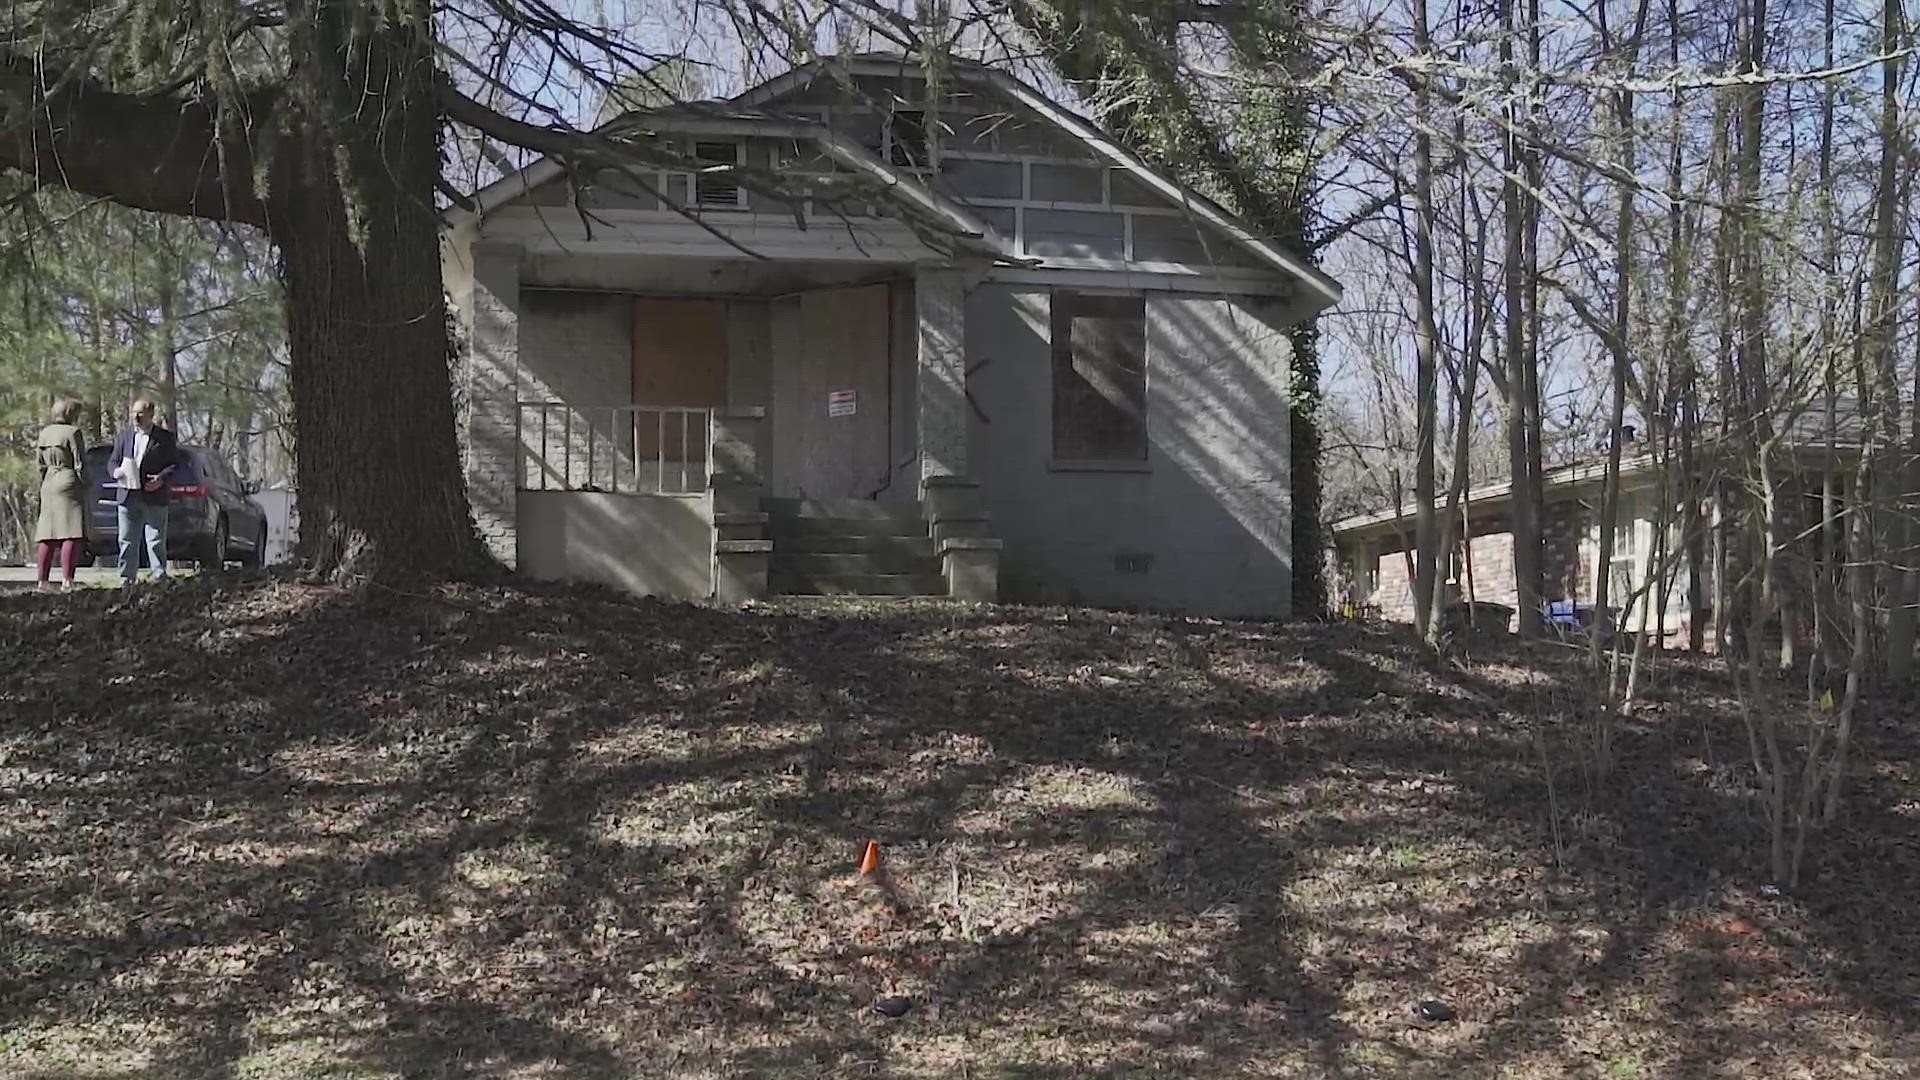 The city is tearing down homes across Atlanta that are falling apart and considered dangerous, usually a welcome move in a neighborhood -- but not for one man.